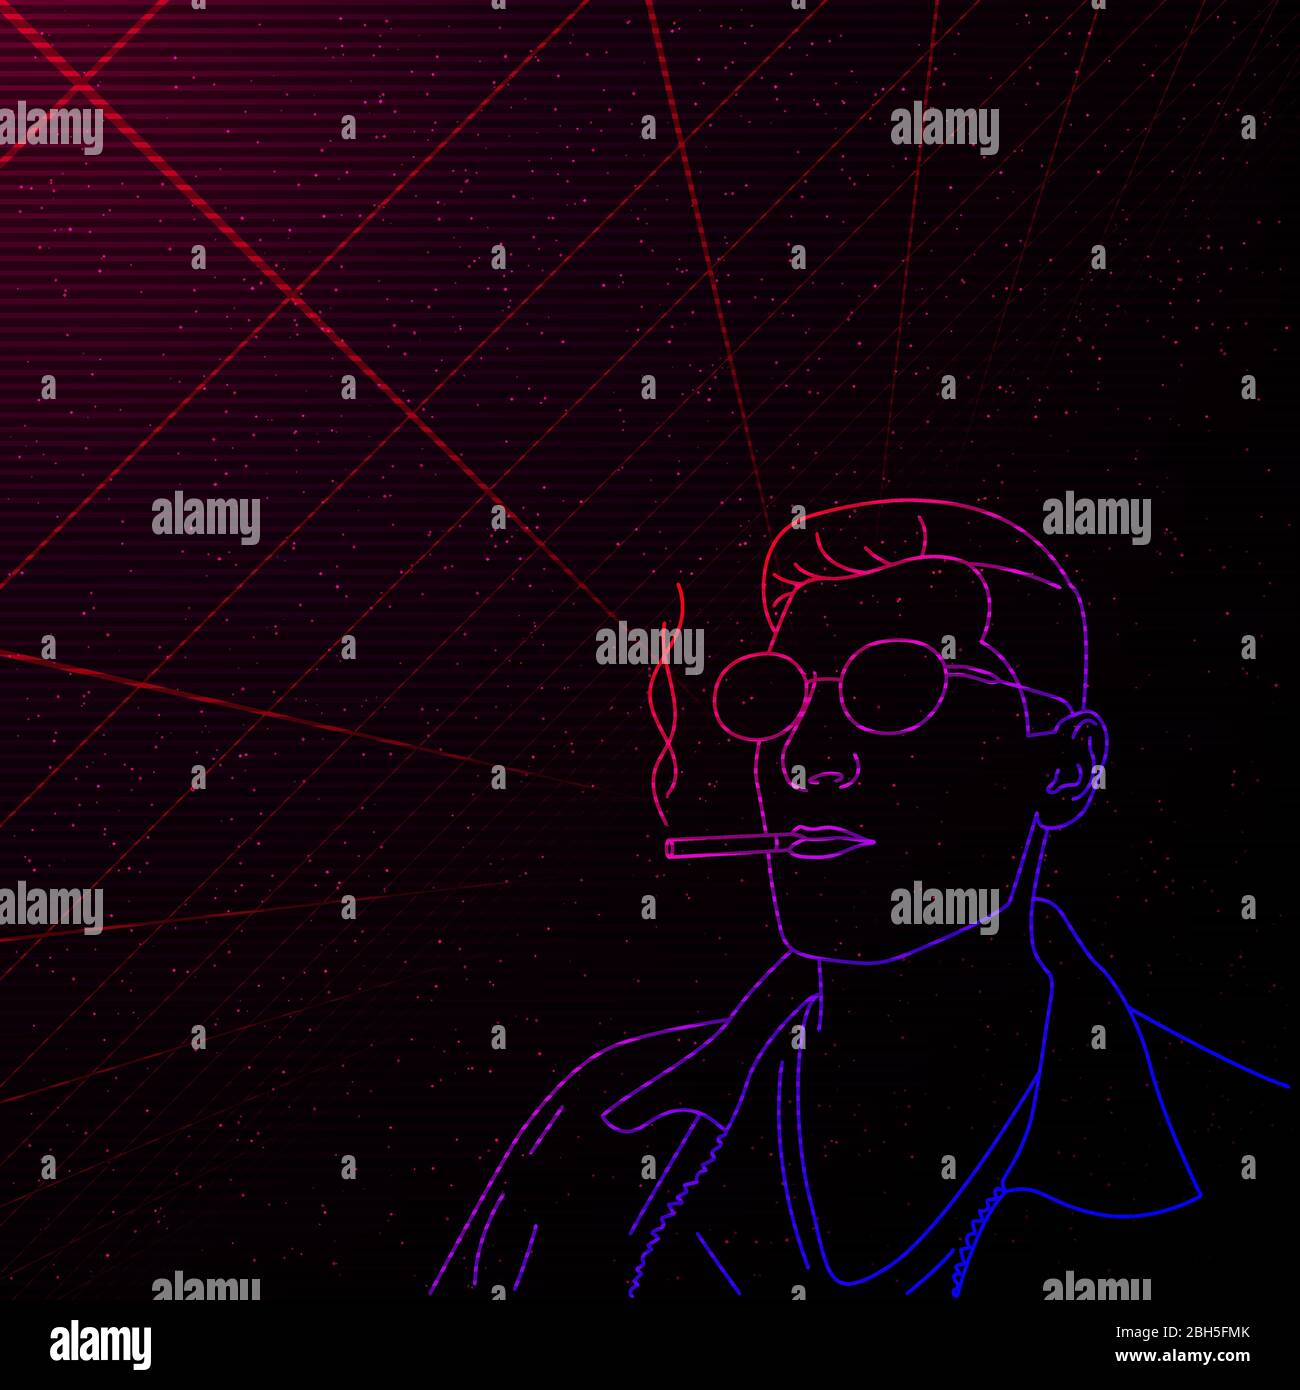 Synthwave Vaporwave Retrowave full face contour vector portrait of a smoking man with glasses on starry space background with laser grid. Design for Stock Vector